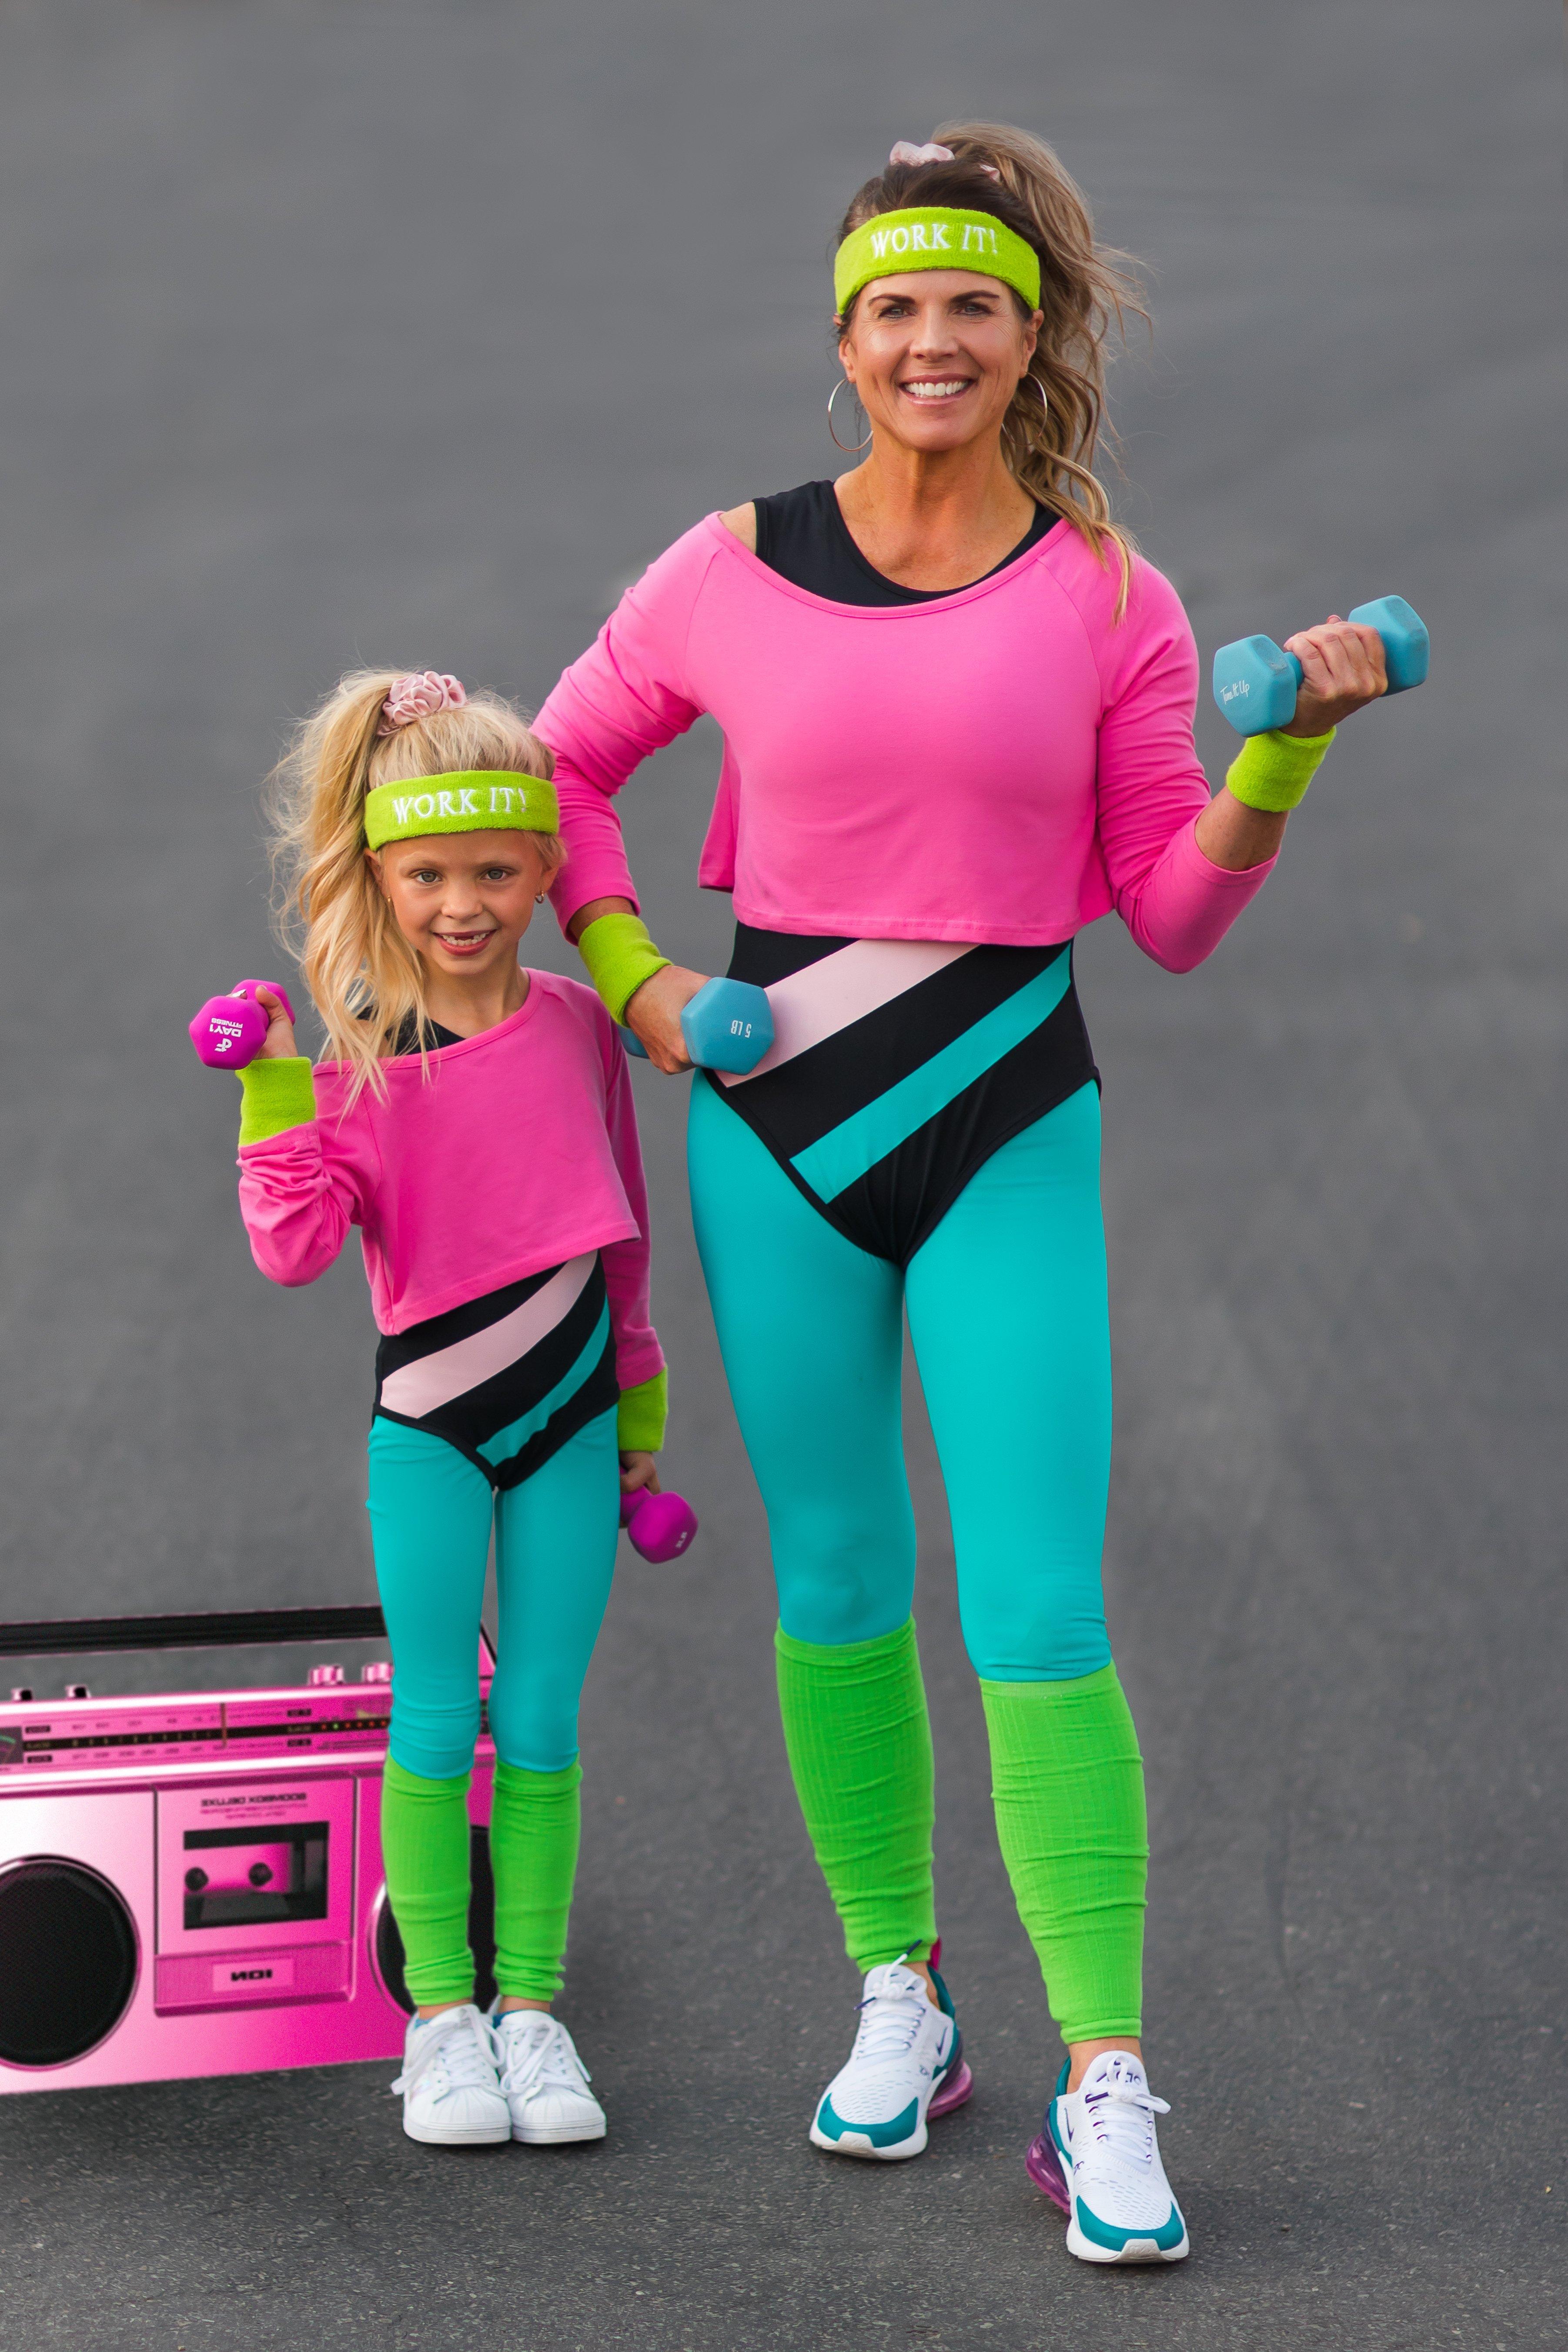 Mom & Me - '80s Workout Costume - COMPLETE SET!